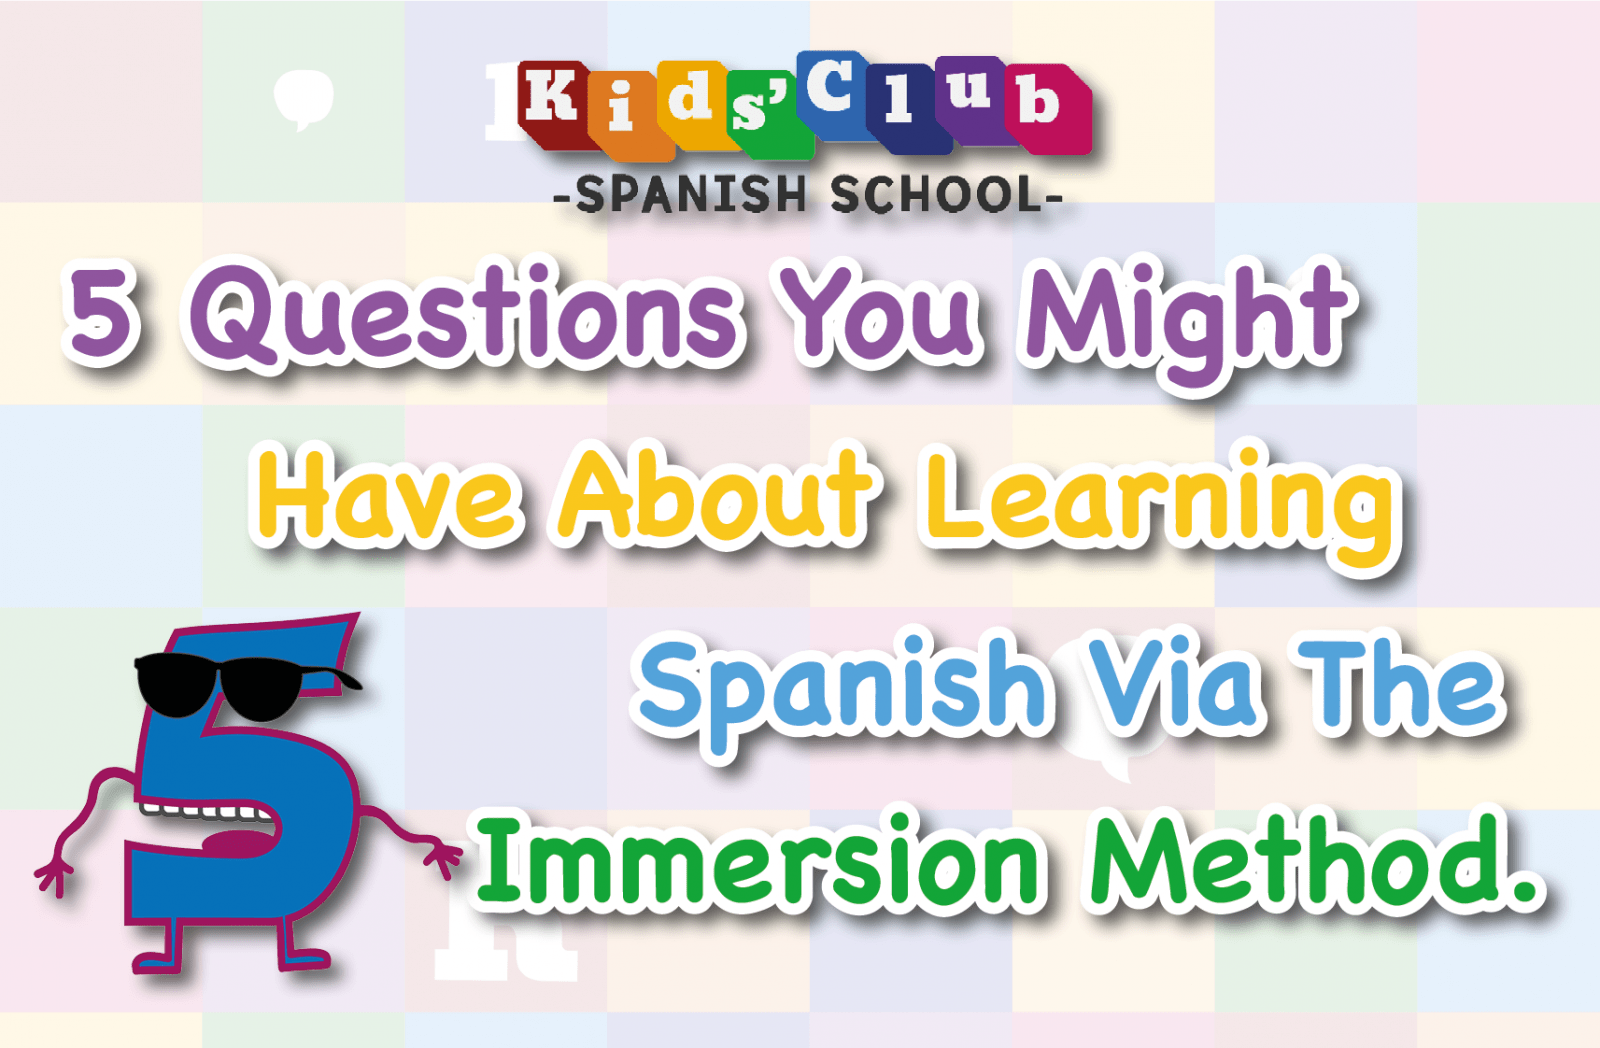 Five Questions You Might Have About Learning Spanish Via The Immersion Method